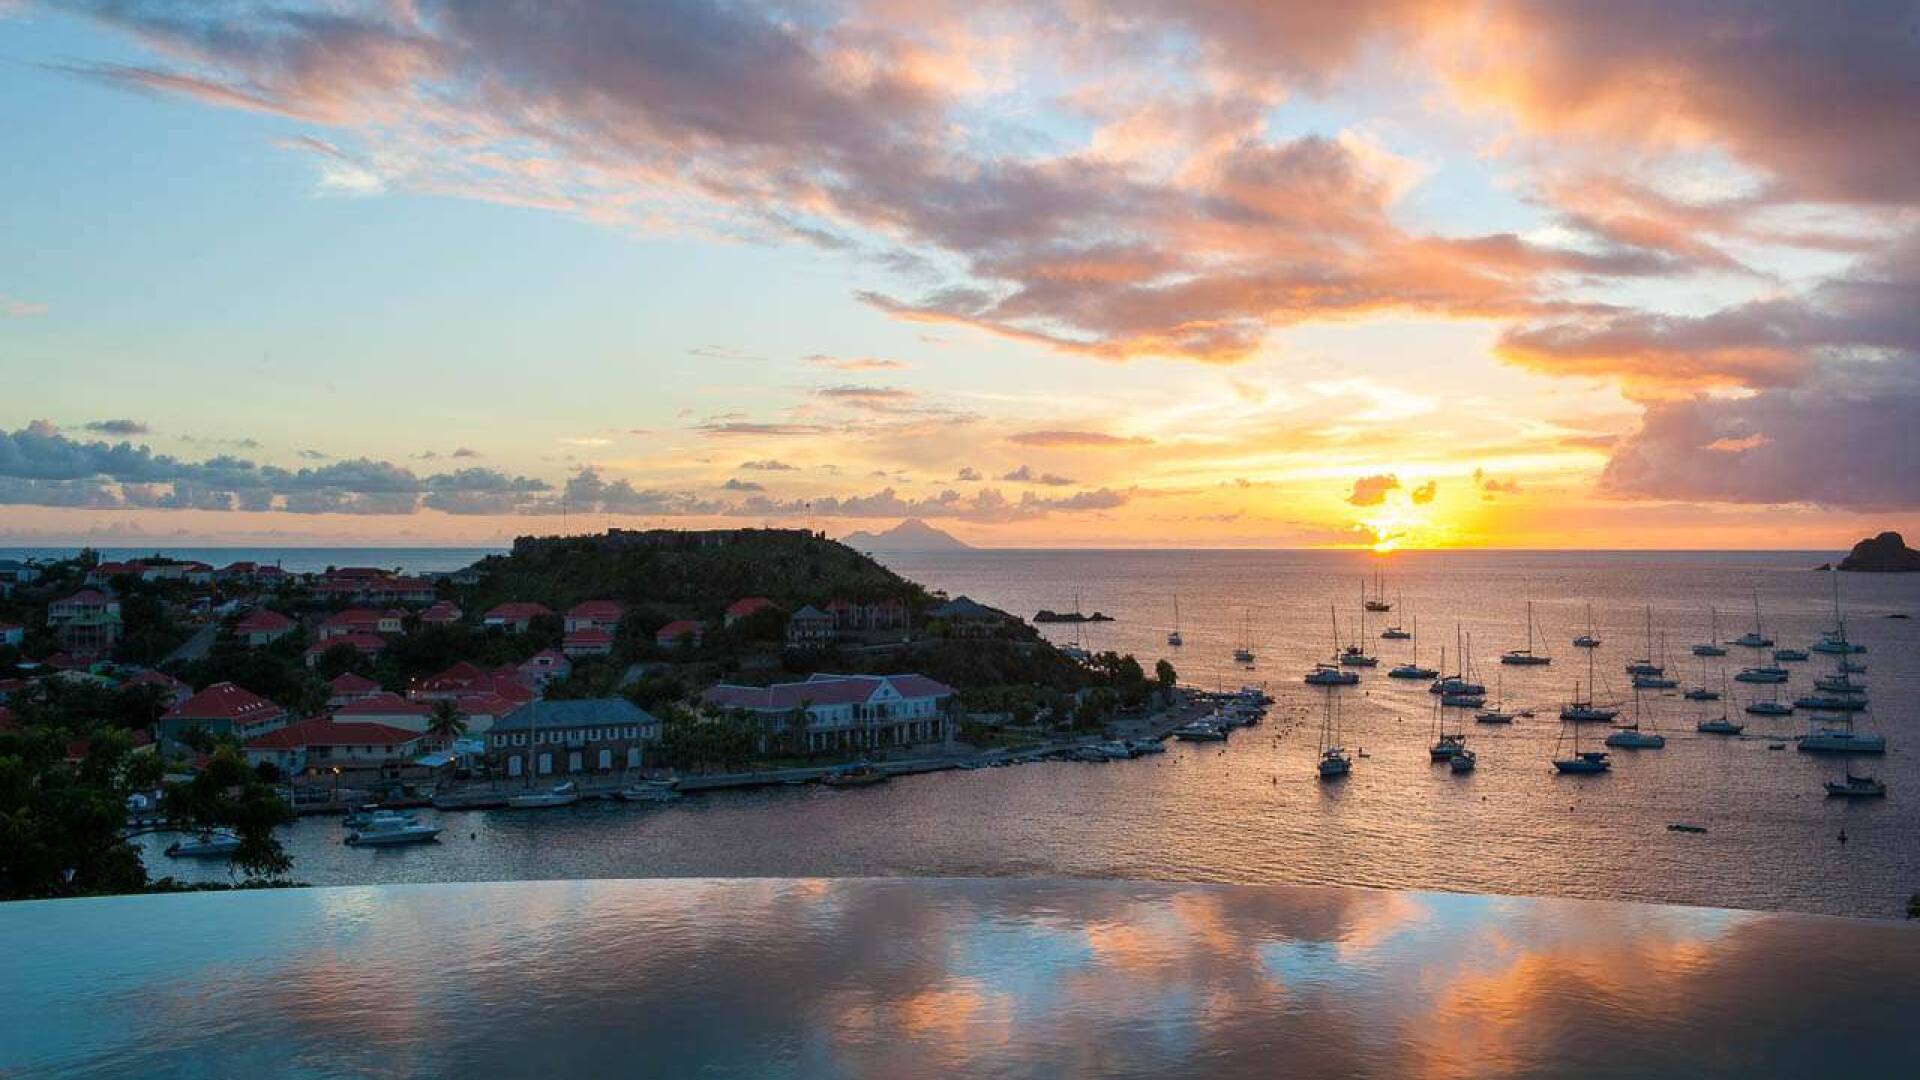 The view from WV LAM, Gustavia, St. Barthelemy